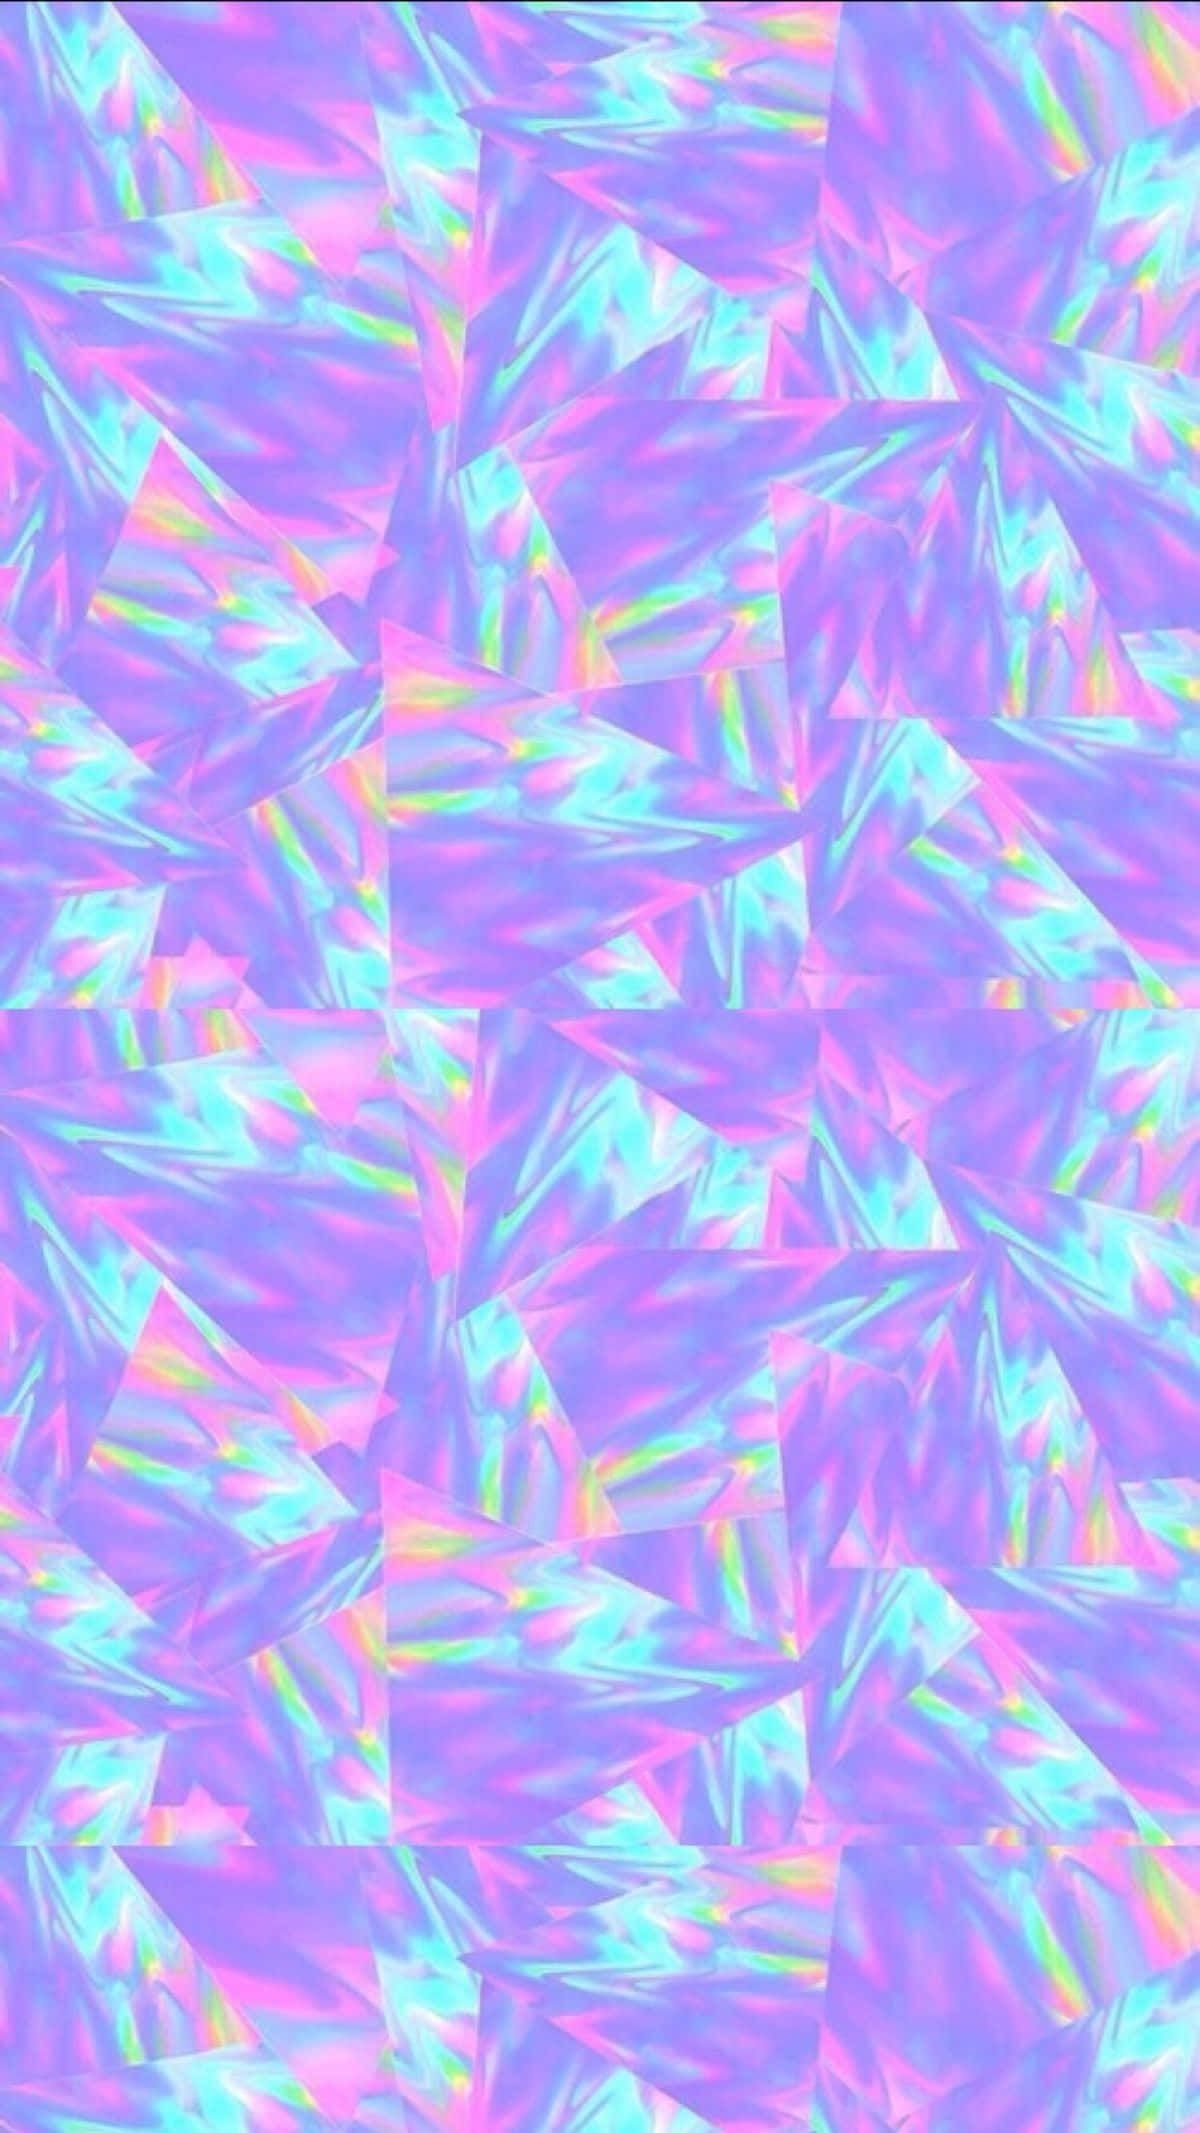 A purple and blue abstract background - Holographic